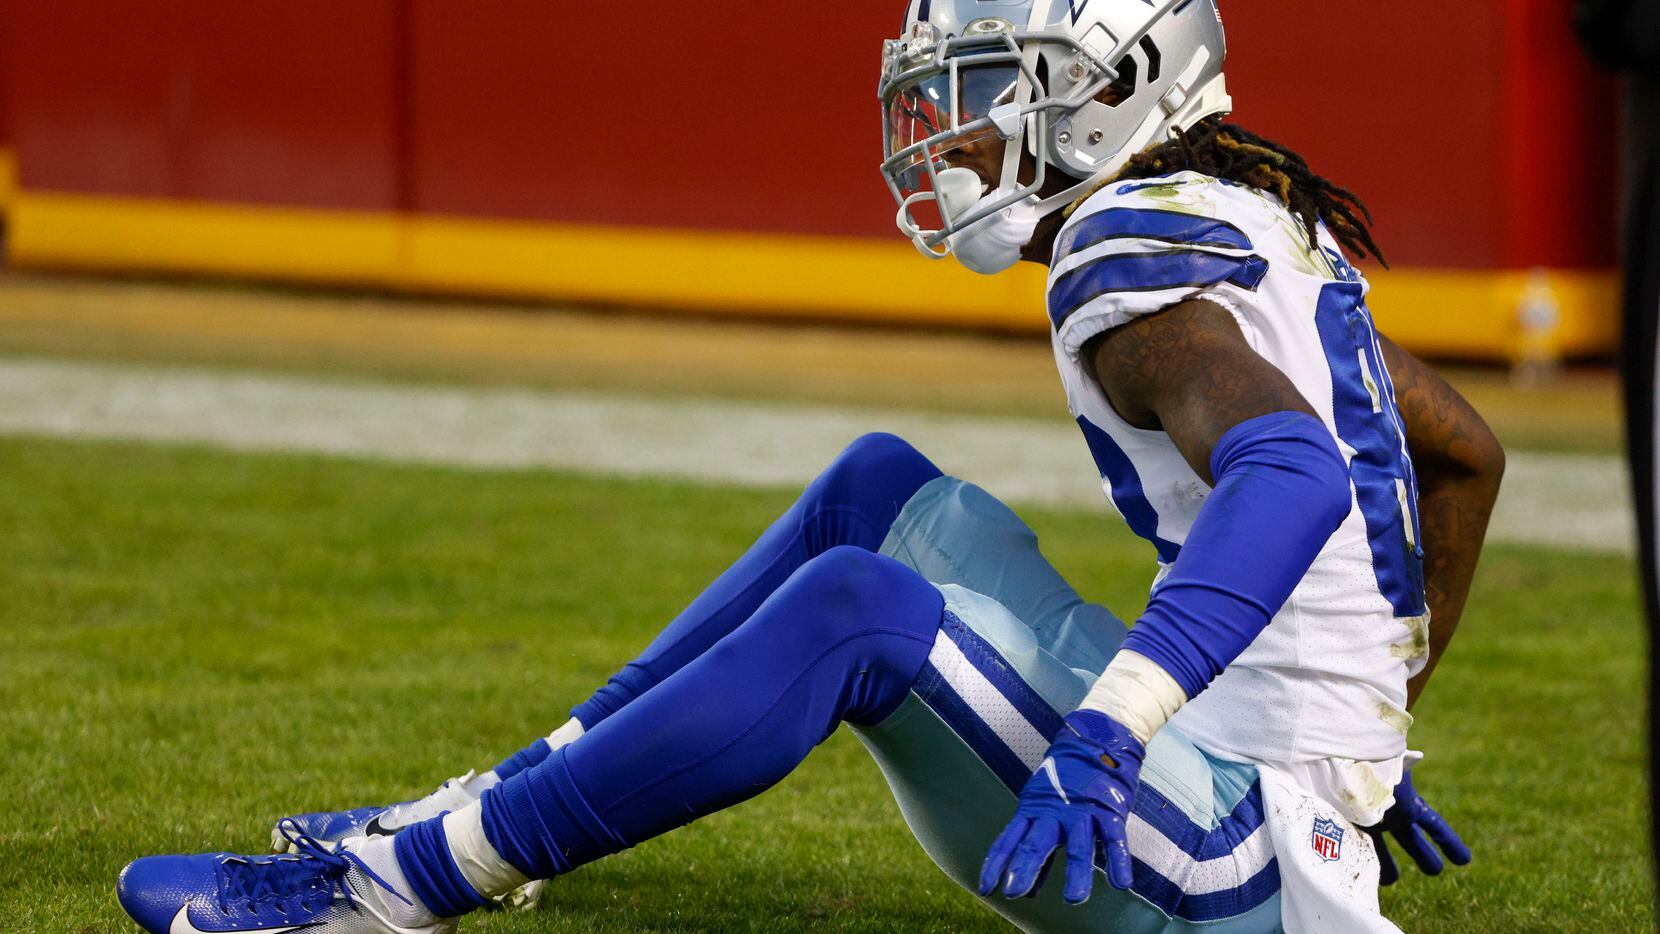 Dallas Cowboys wide receiver CeeDee Lamb (88) sits in the end zone after an interception from quarterback Dak Prescott (4) during the first half of an NFL football game against the Kansas City Chiefs at Arrowhead Stadium on Sunday, Nov. 21, 2021, in Kansas City, Missouri.